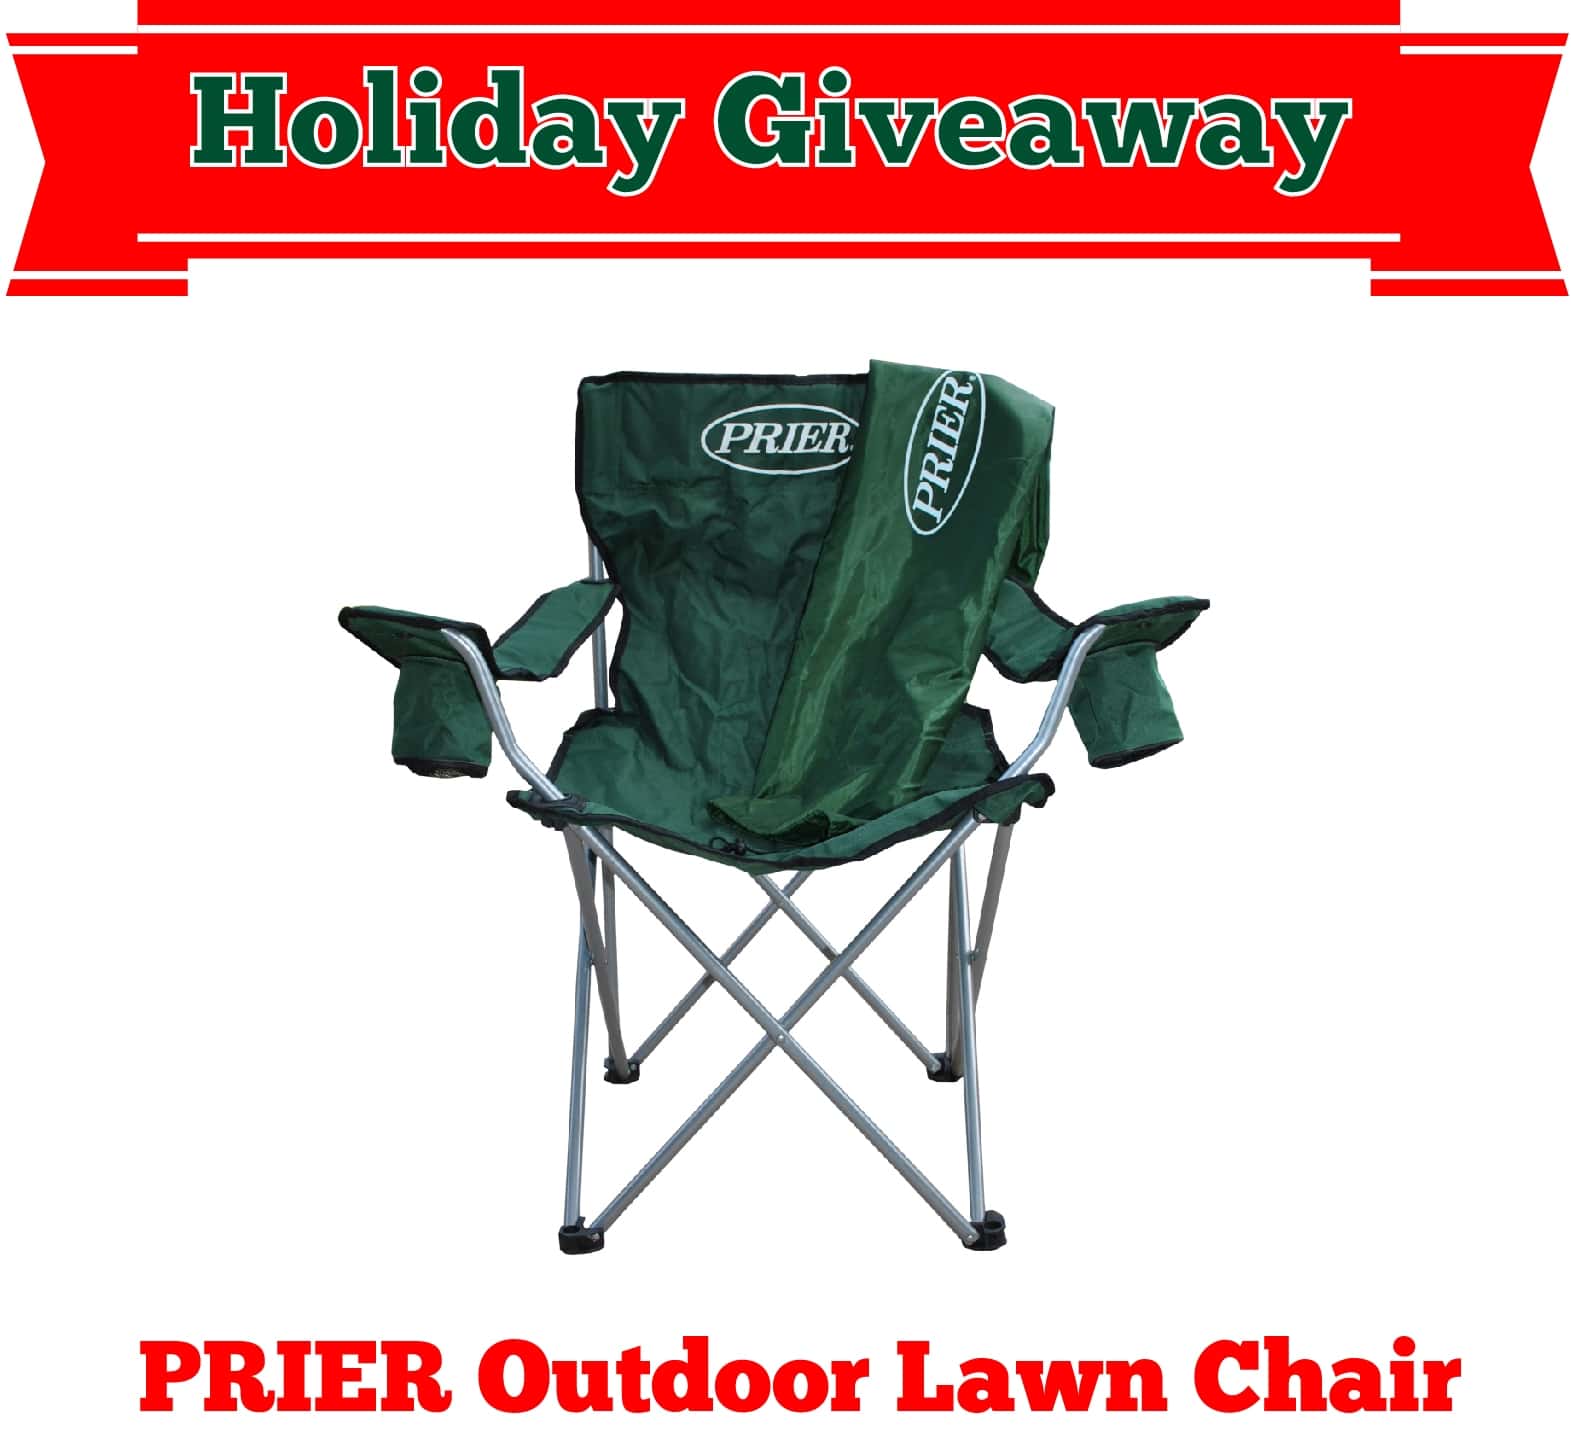 Outdoor Lawn Chair Giveaway